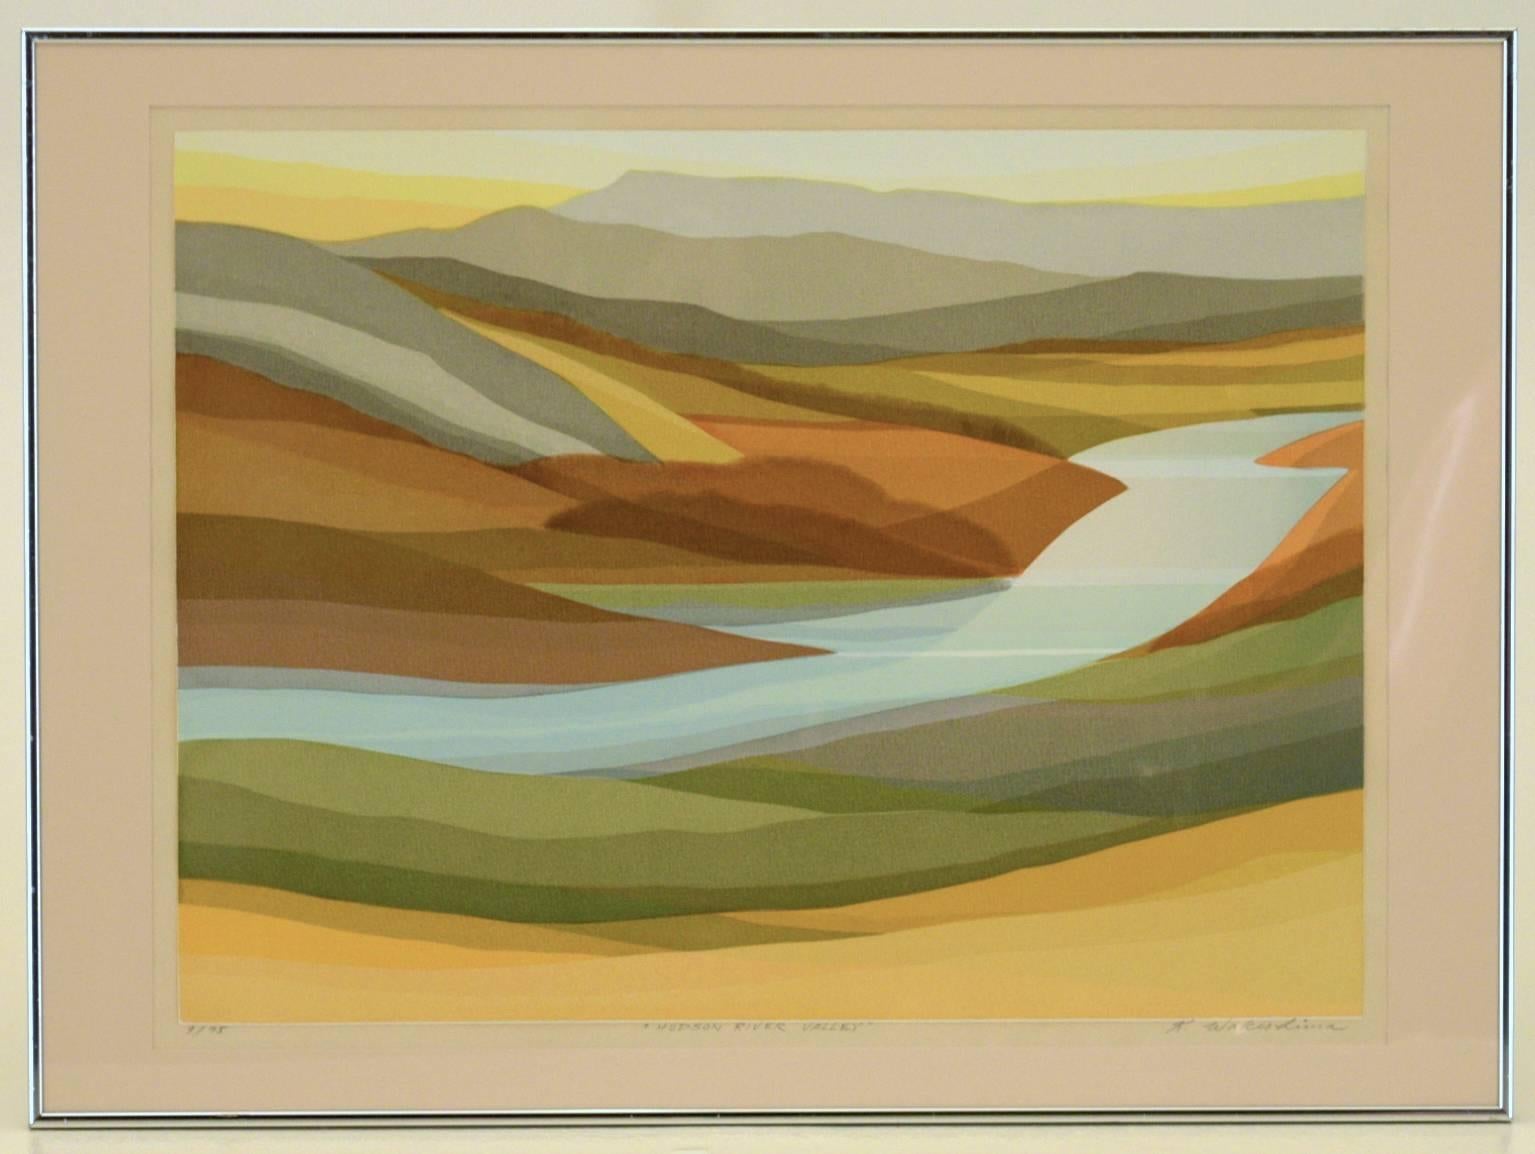 American Japanese Artist Kenuske Wakeshima. Landscape depicting The "Hudson Valley River" of New York. Depicts wonderful winter tones and hues.

Pencil signed Kensuke Wakeshima (Japanese, B. 1937) lower right. Original art.

Known for